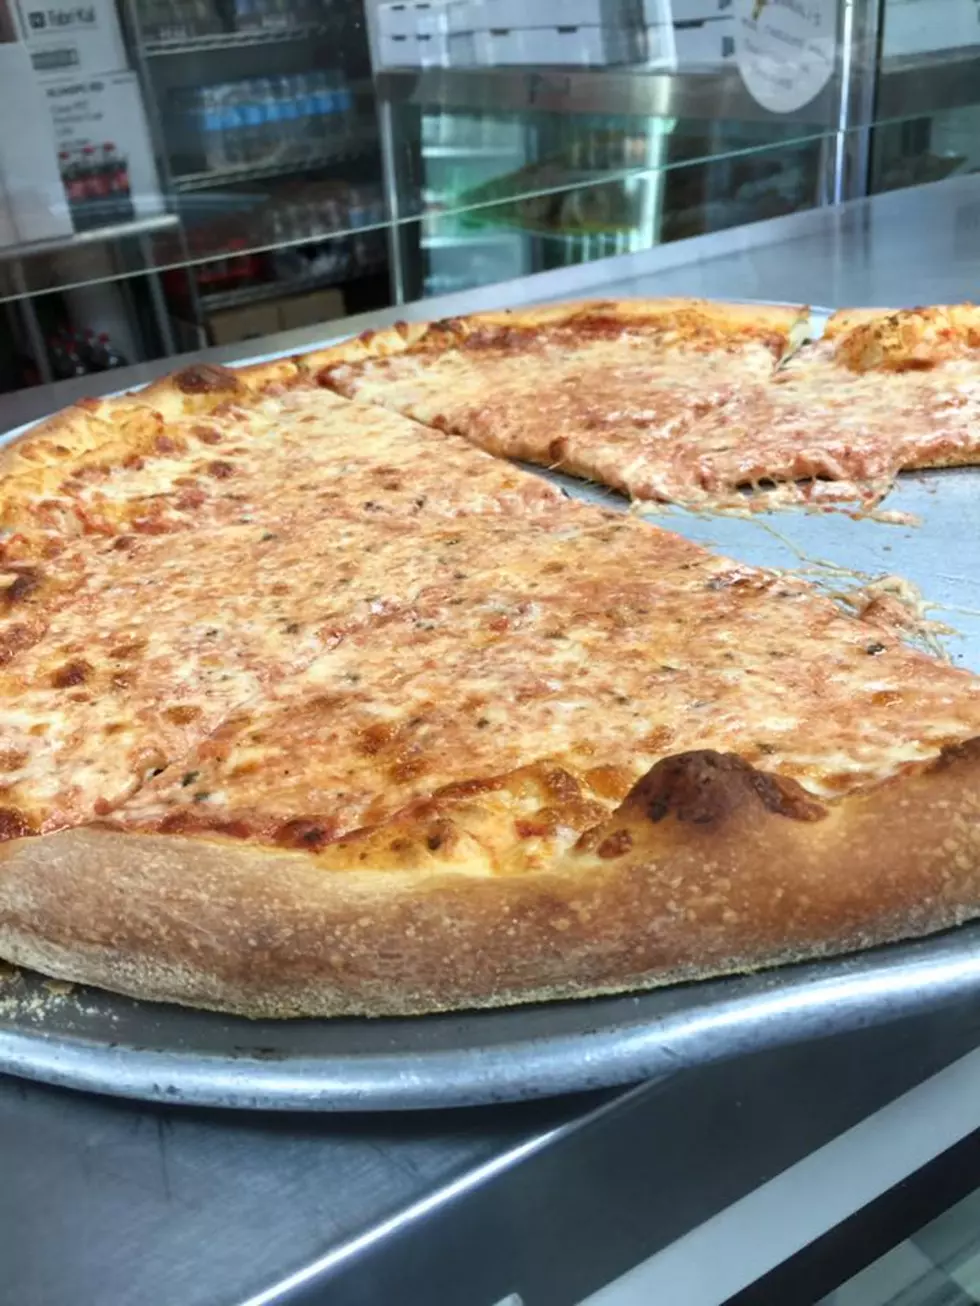 These Are South Jersey’s 3 Favorite Pizza Toppings